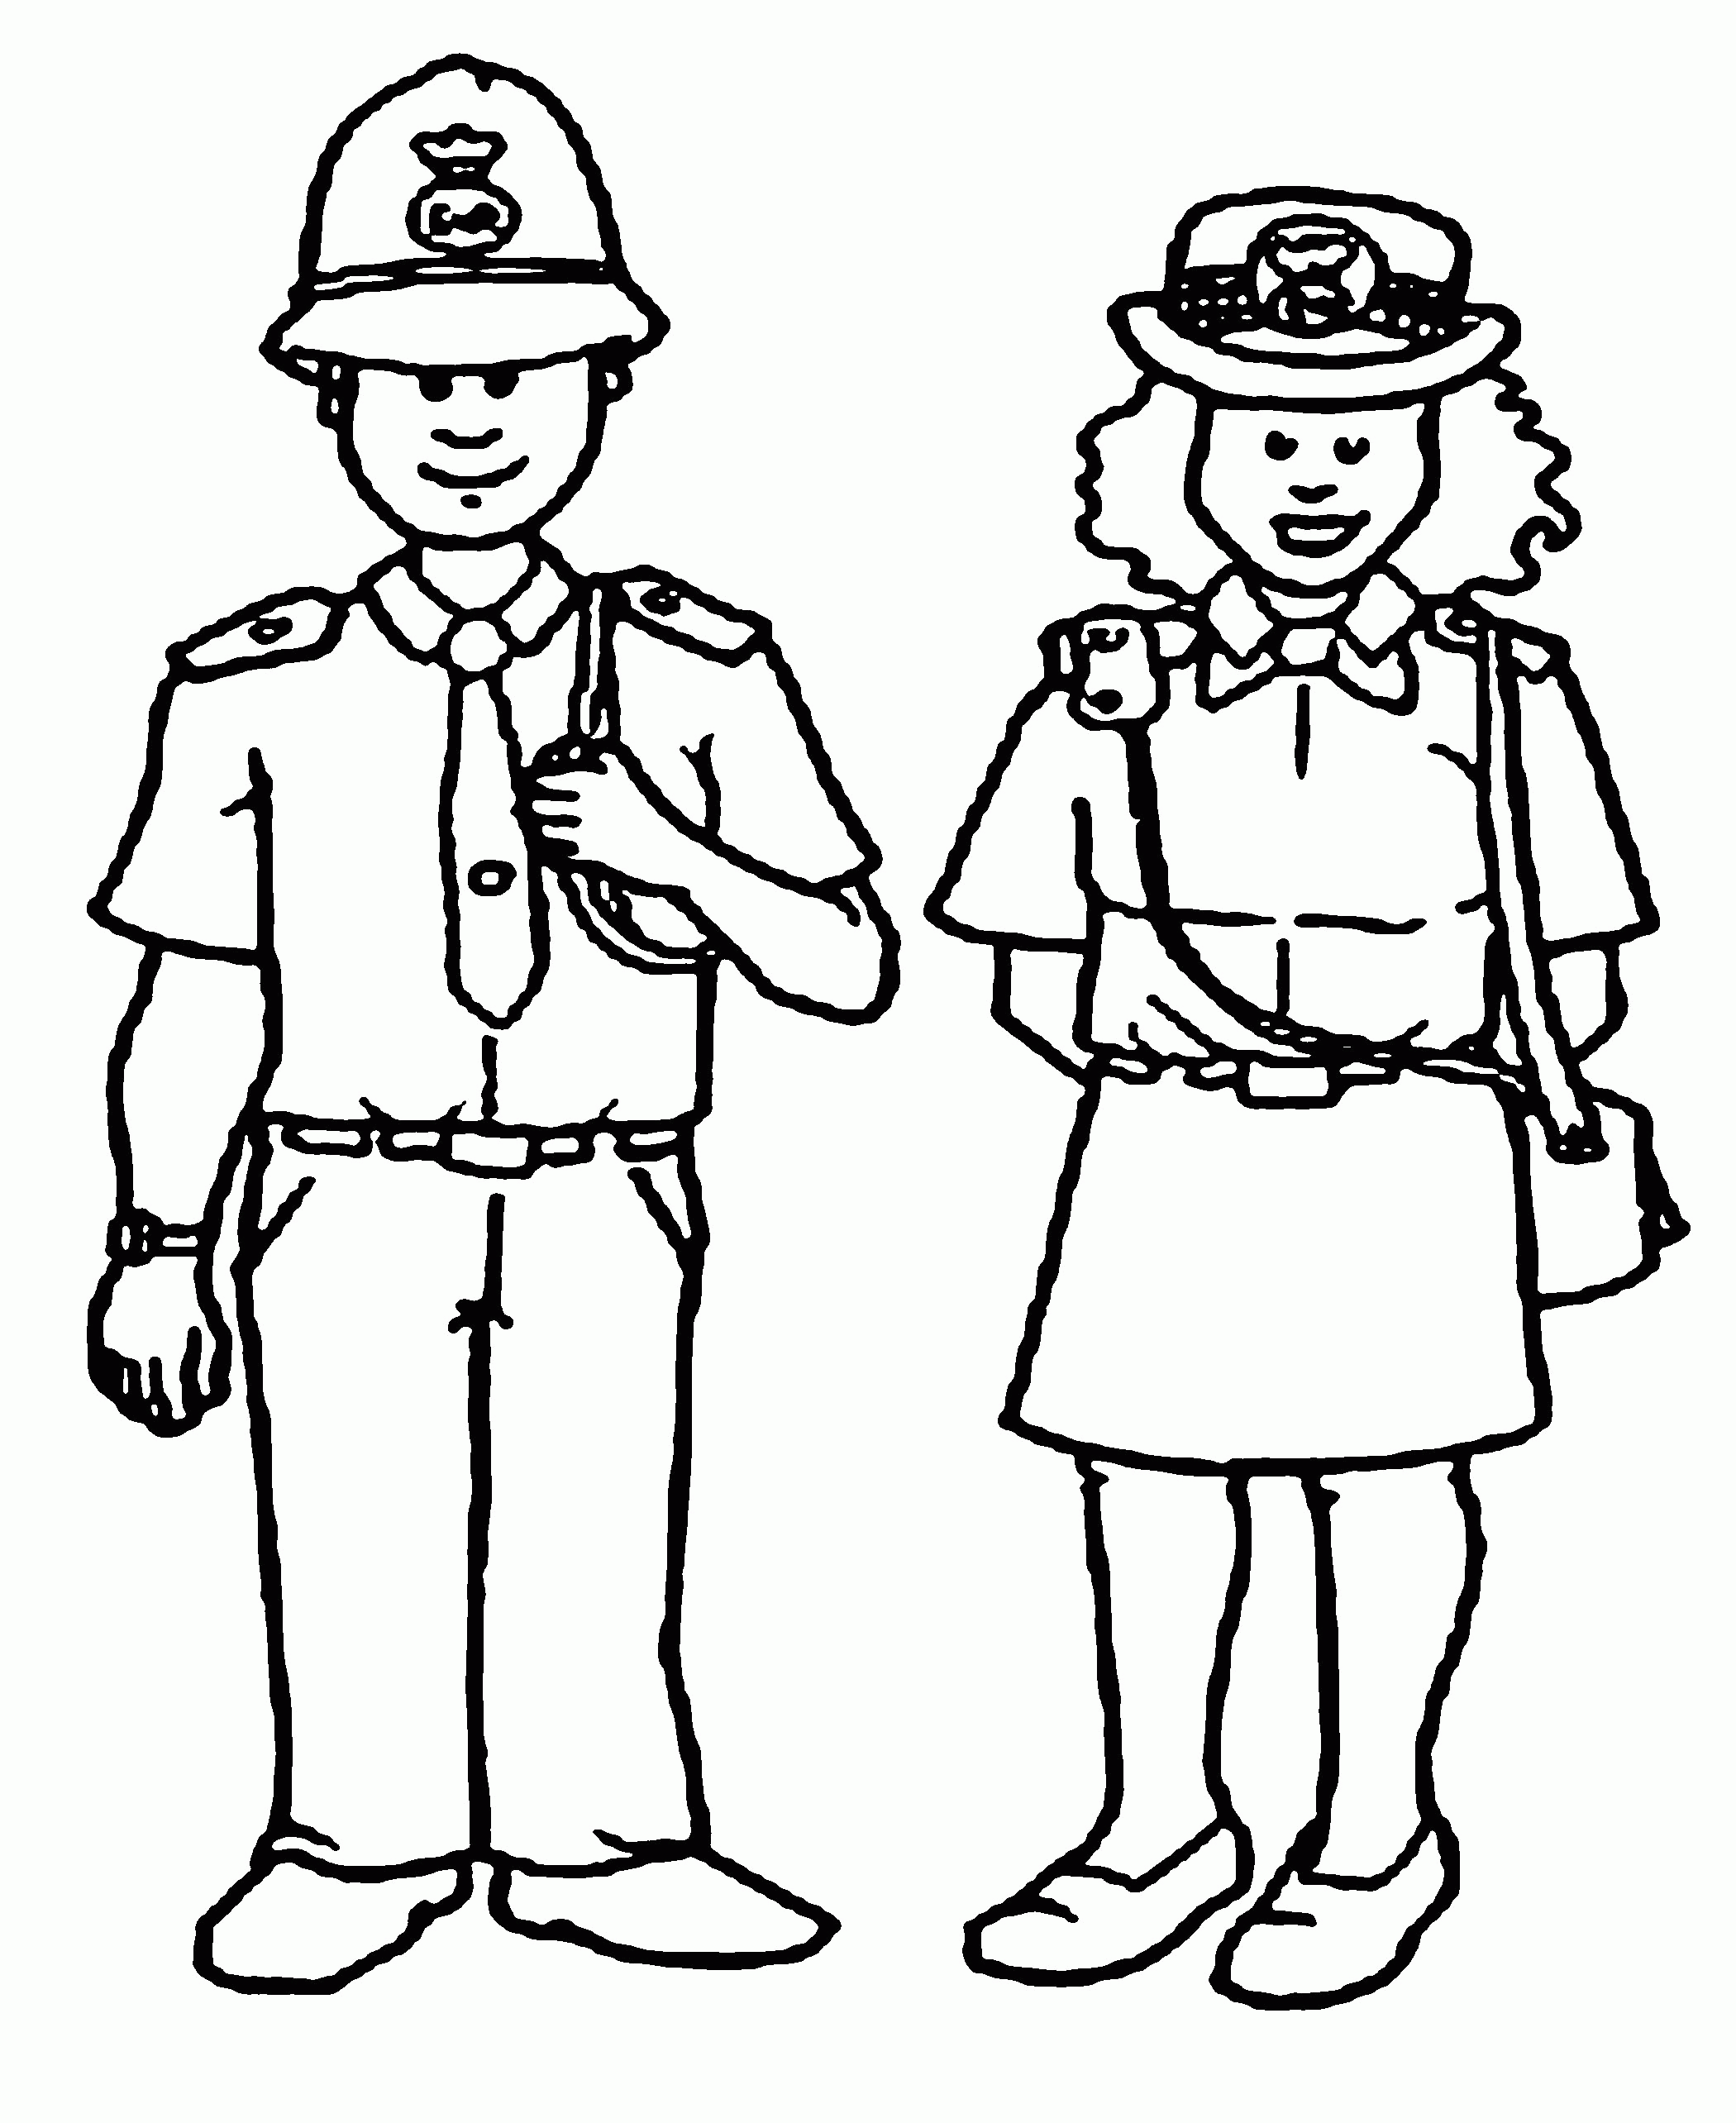 Police Women And Policeman Coloring Pages For Kids #cLO ...